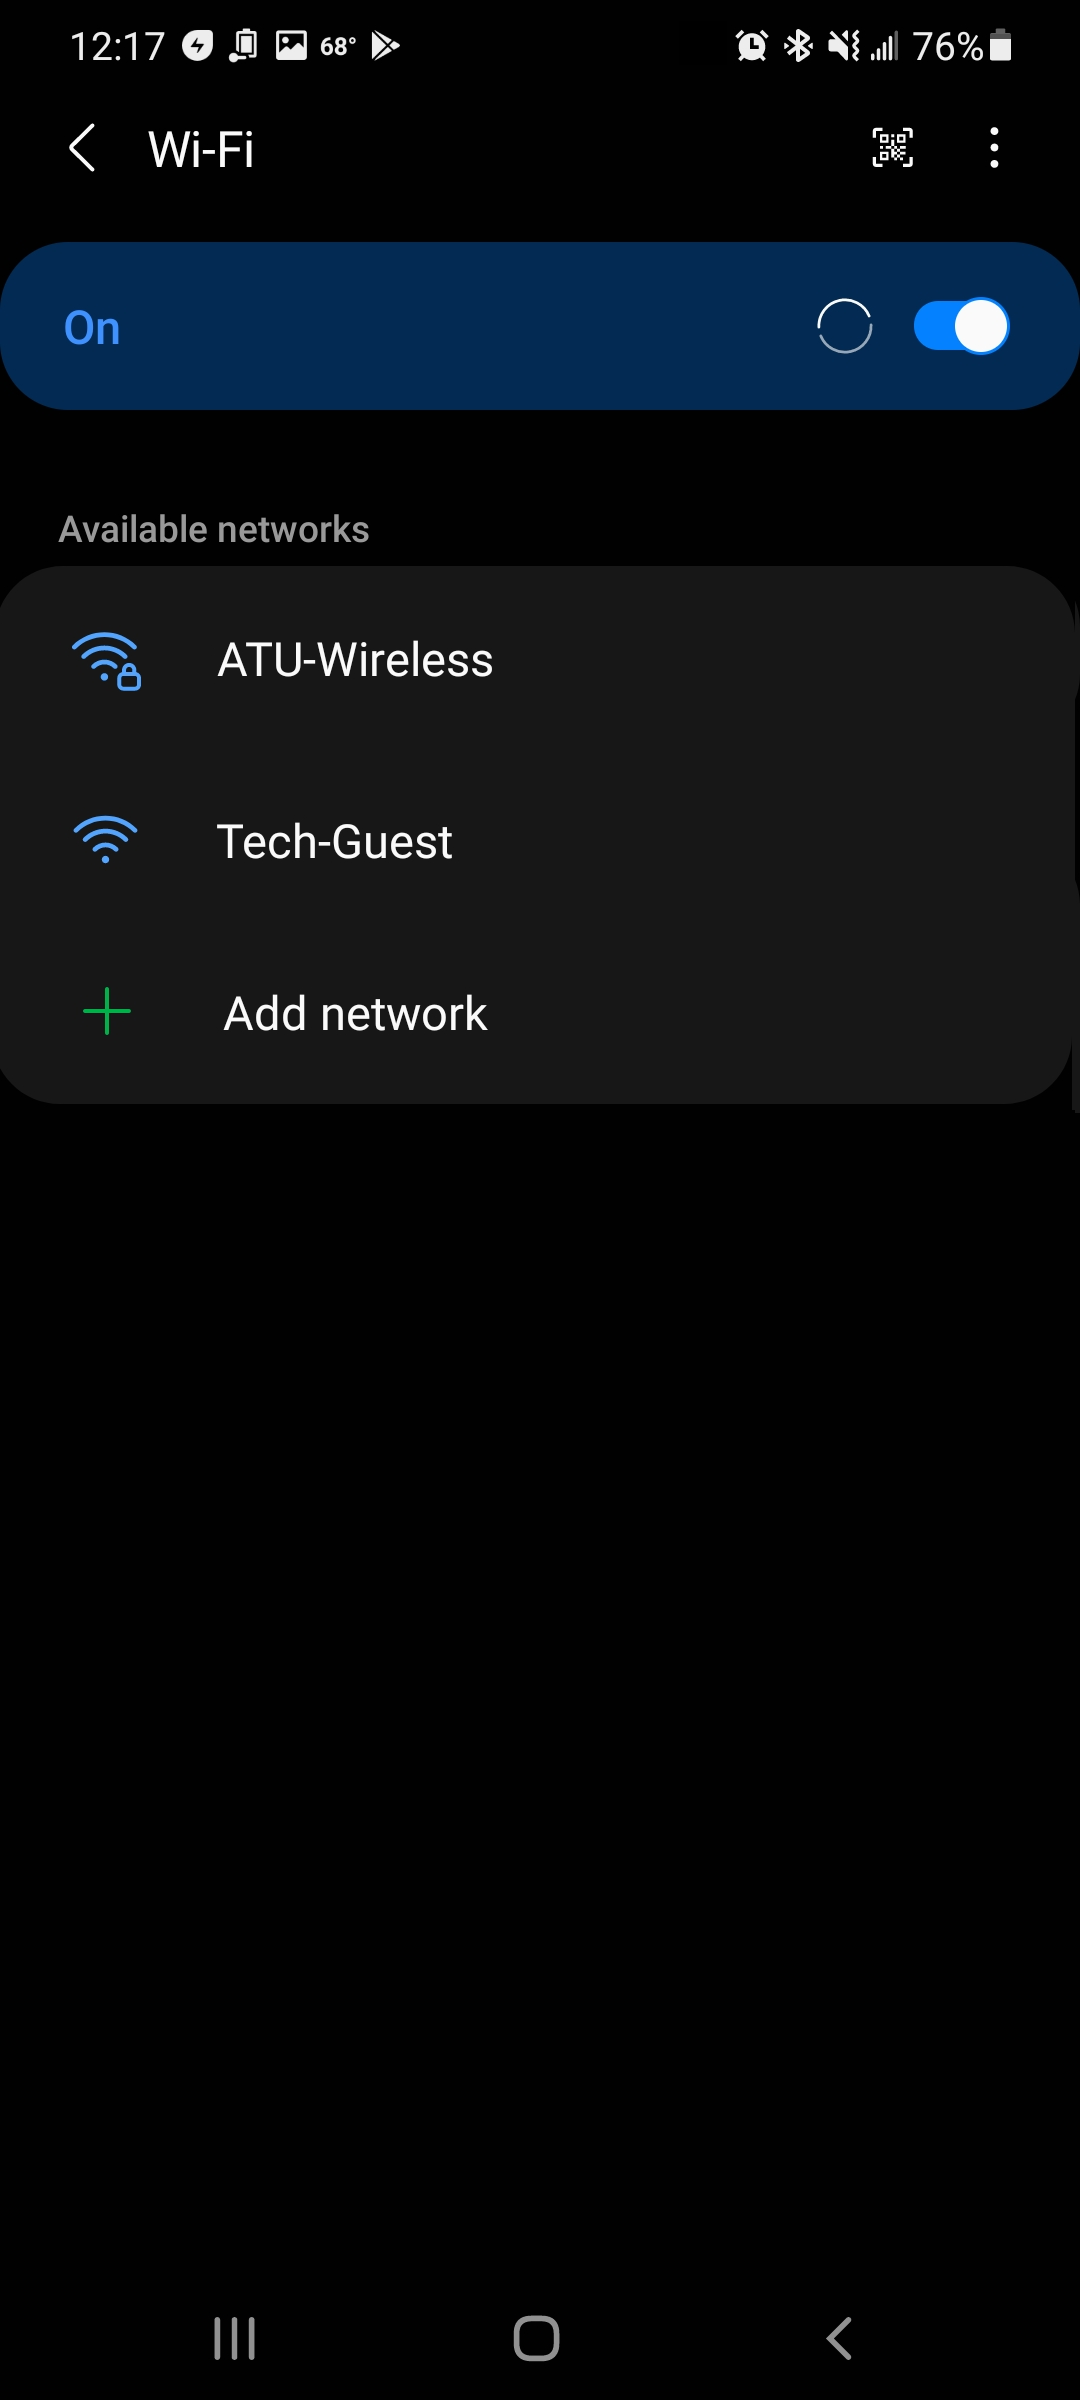 Wifi networks menu on an Android phone